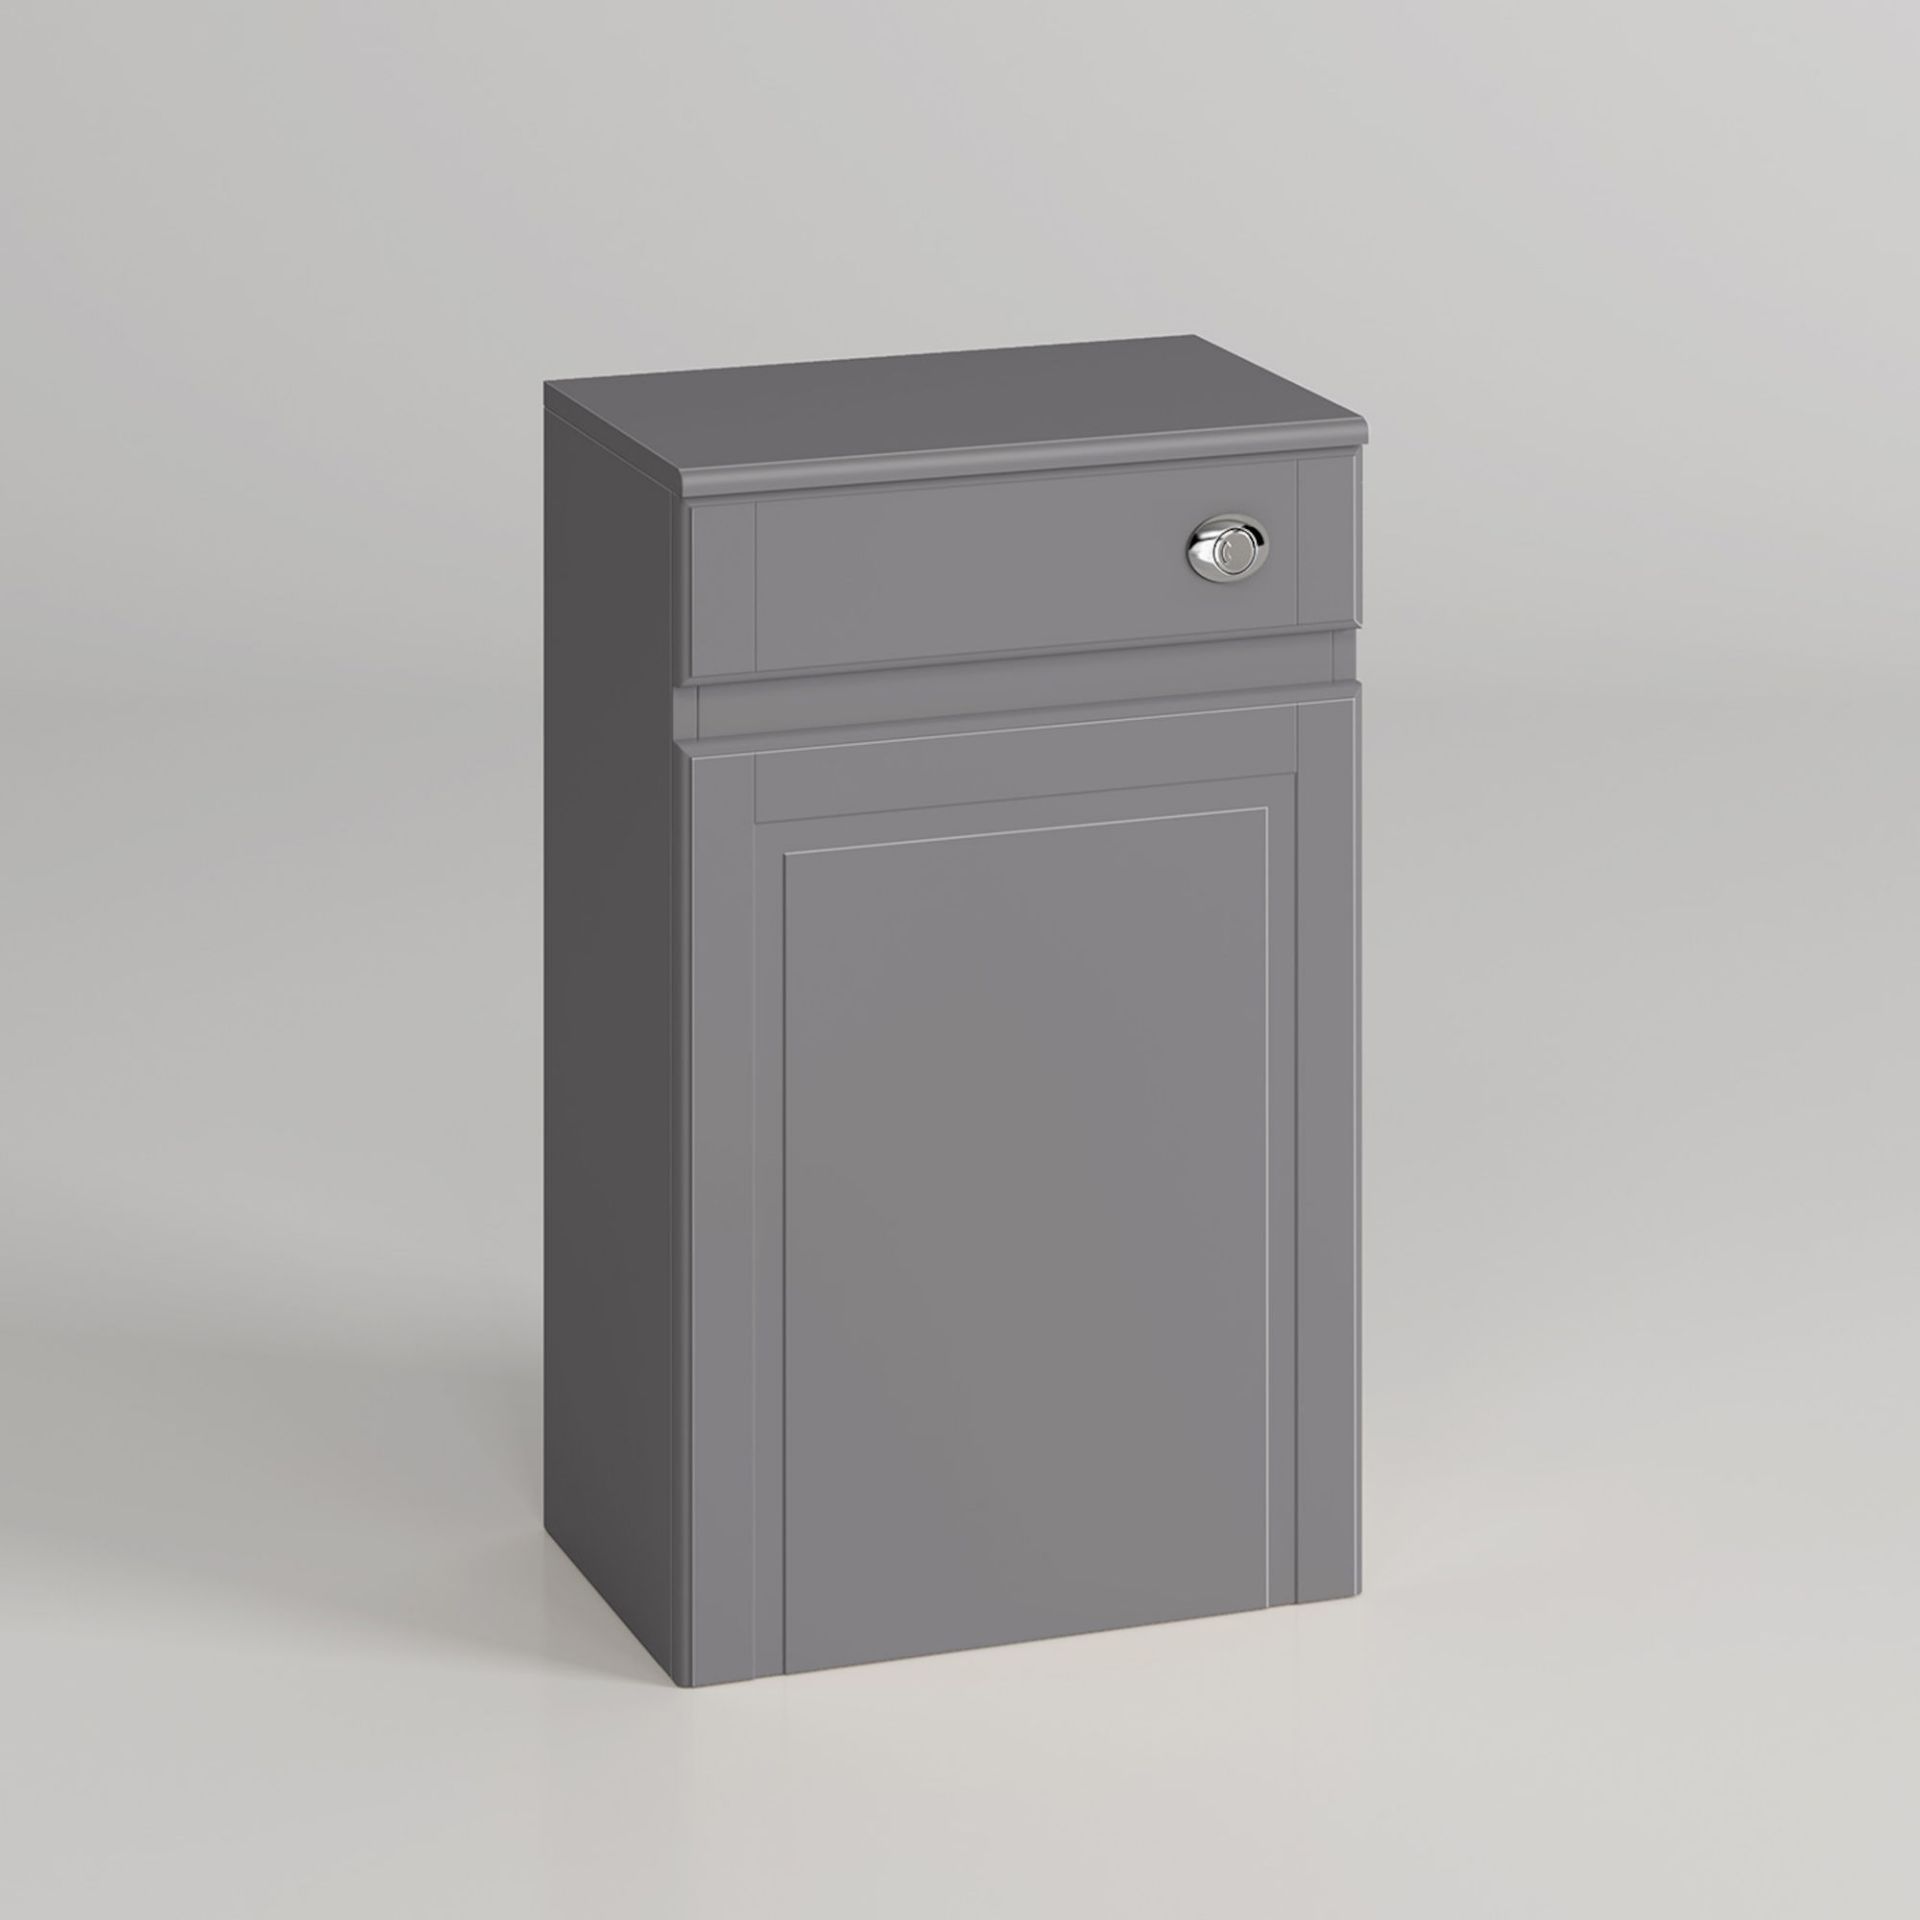 (ZL17) 500mm Cambridge Midnight Grey Back To Wall Toilet Unit. RRP £199.99. Our discreet unit